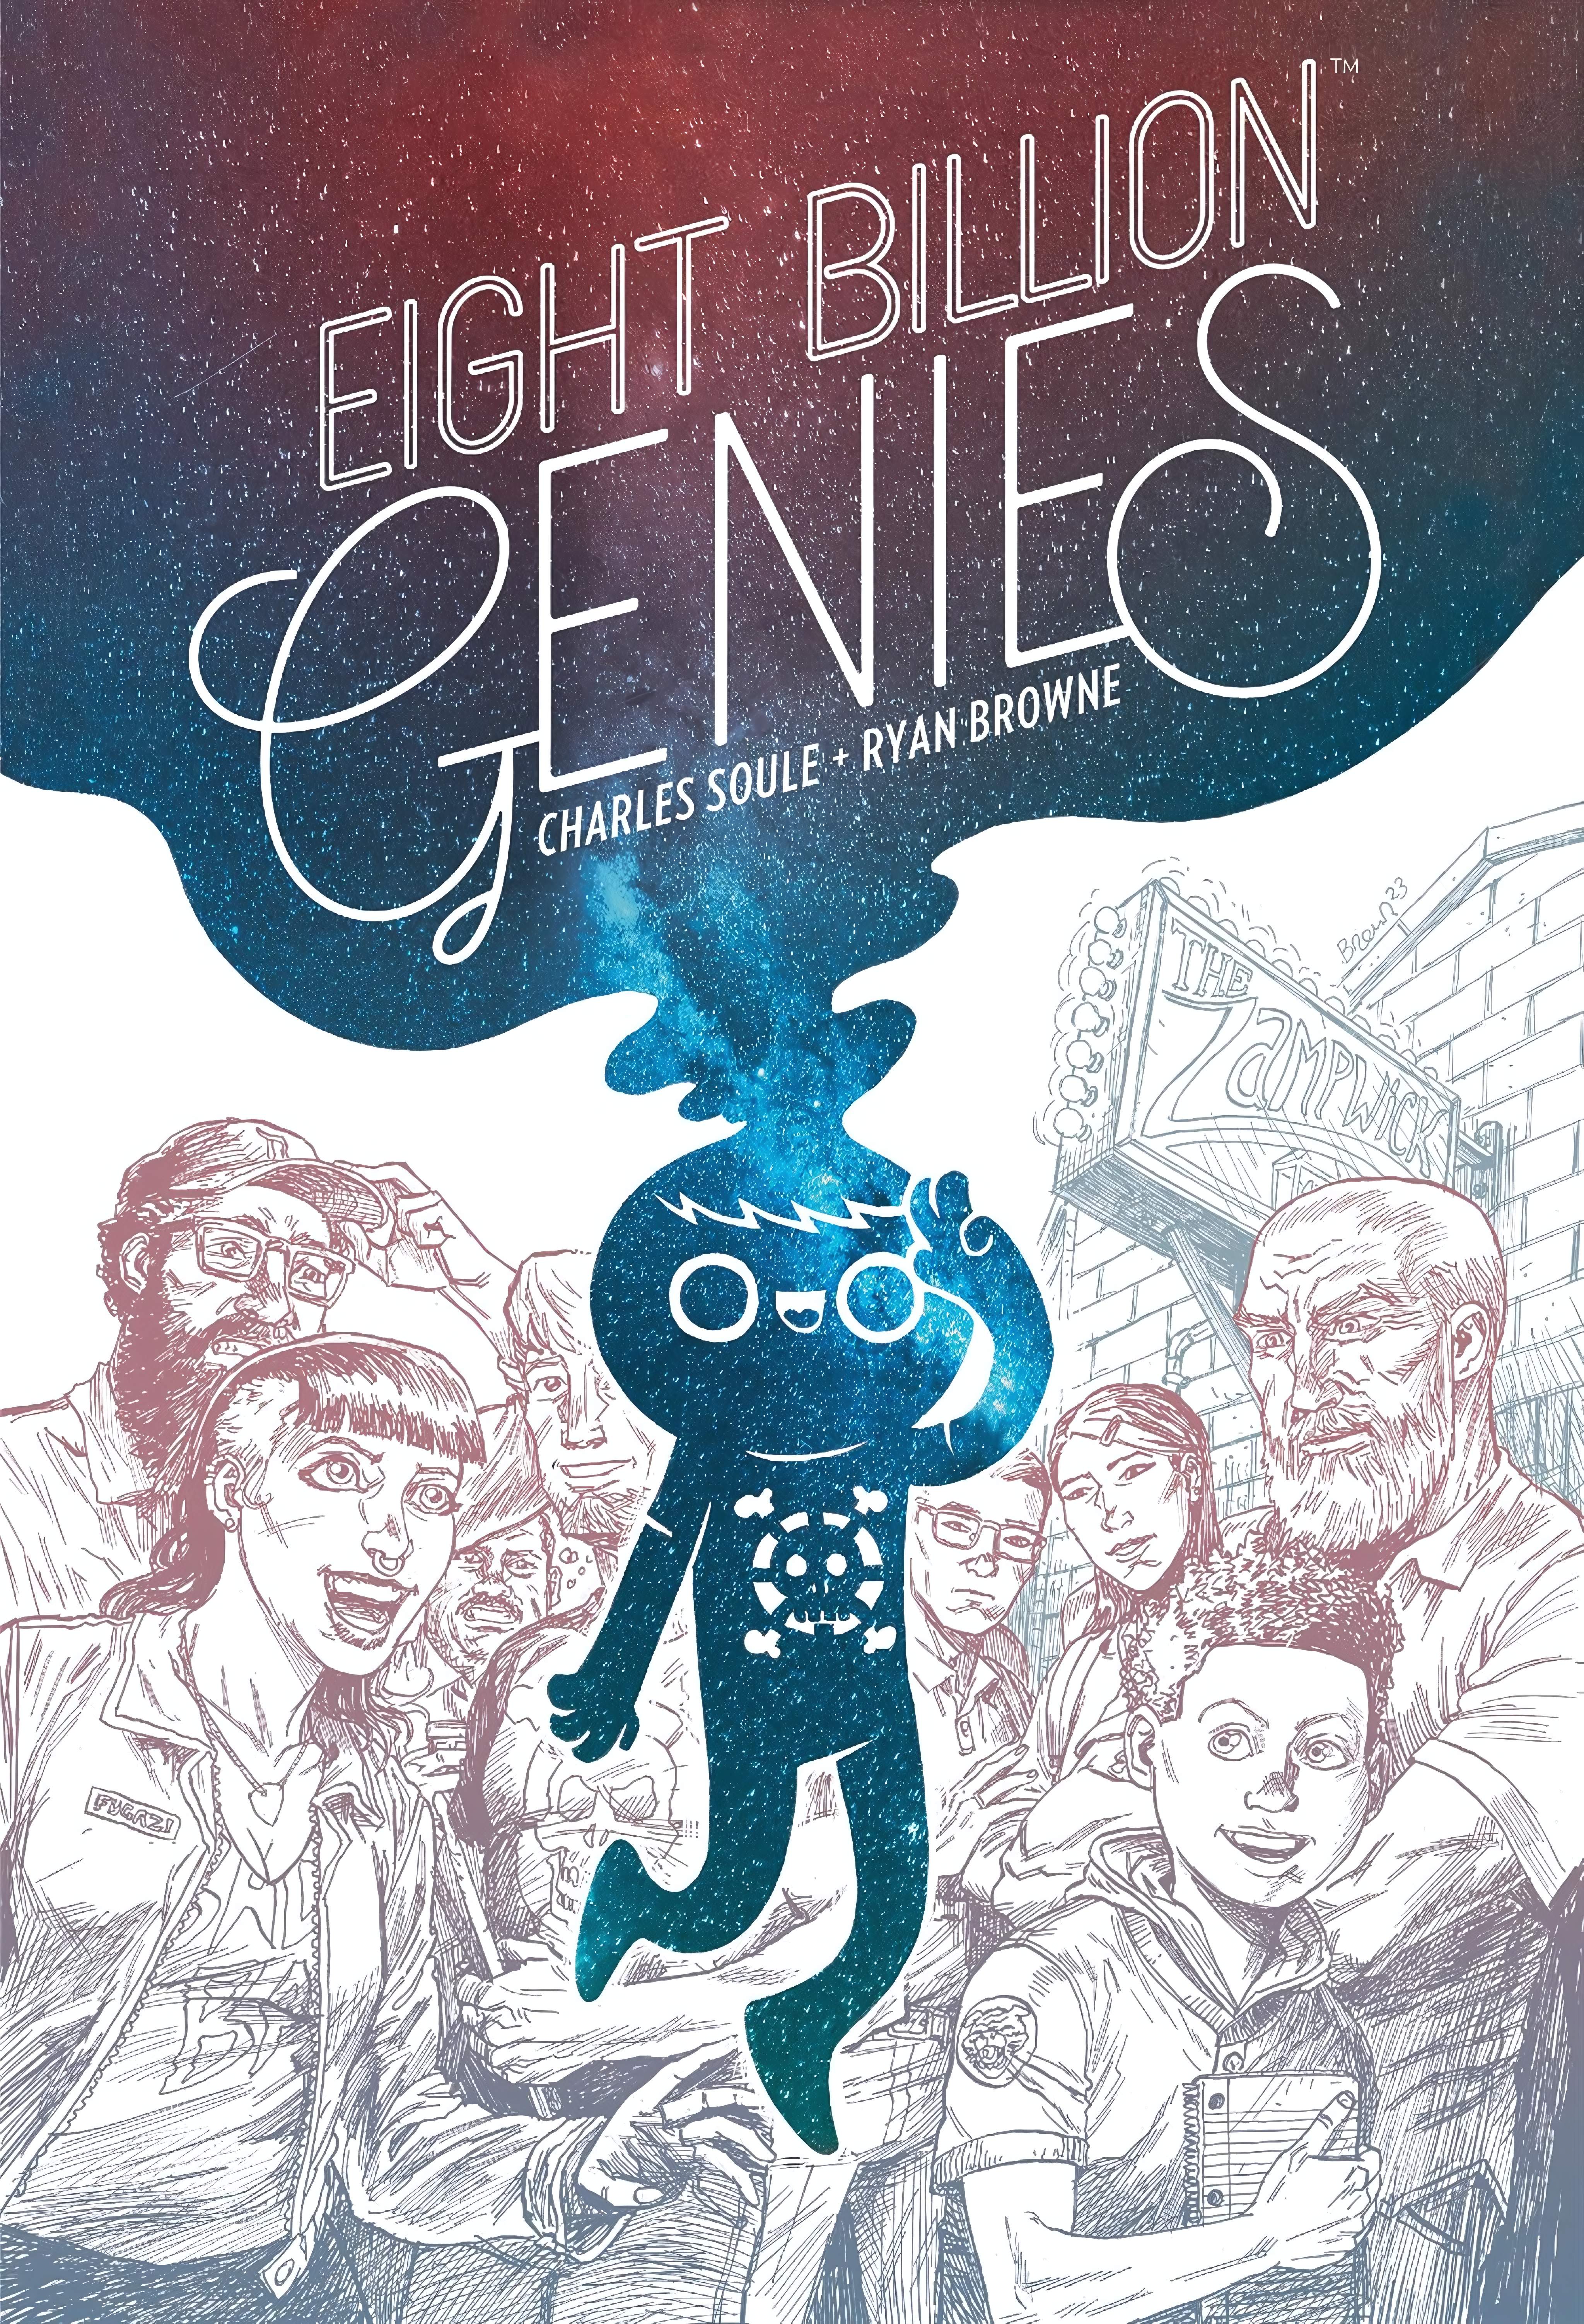 Read online Eight Billion Genies comic -  Issue # _Deluxe Edition (Part 1) - 1